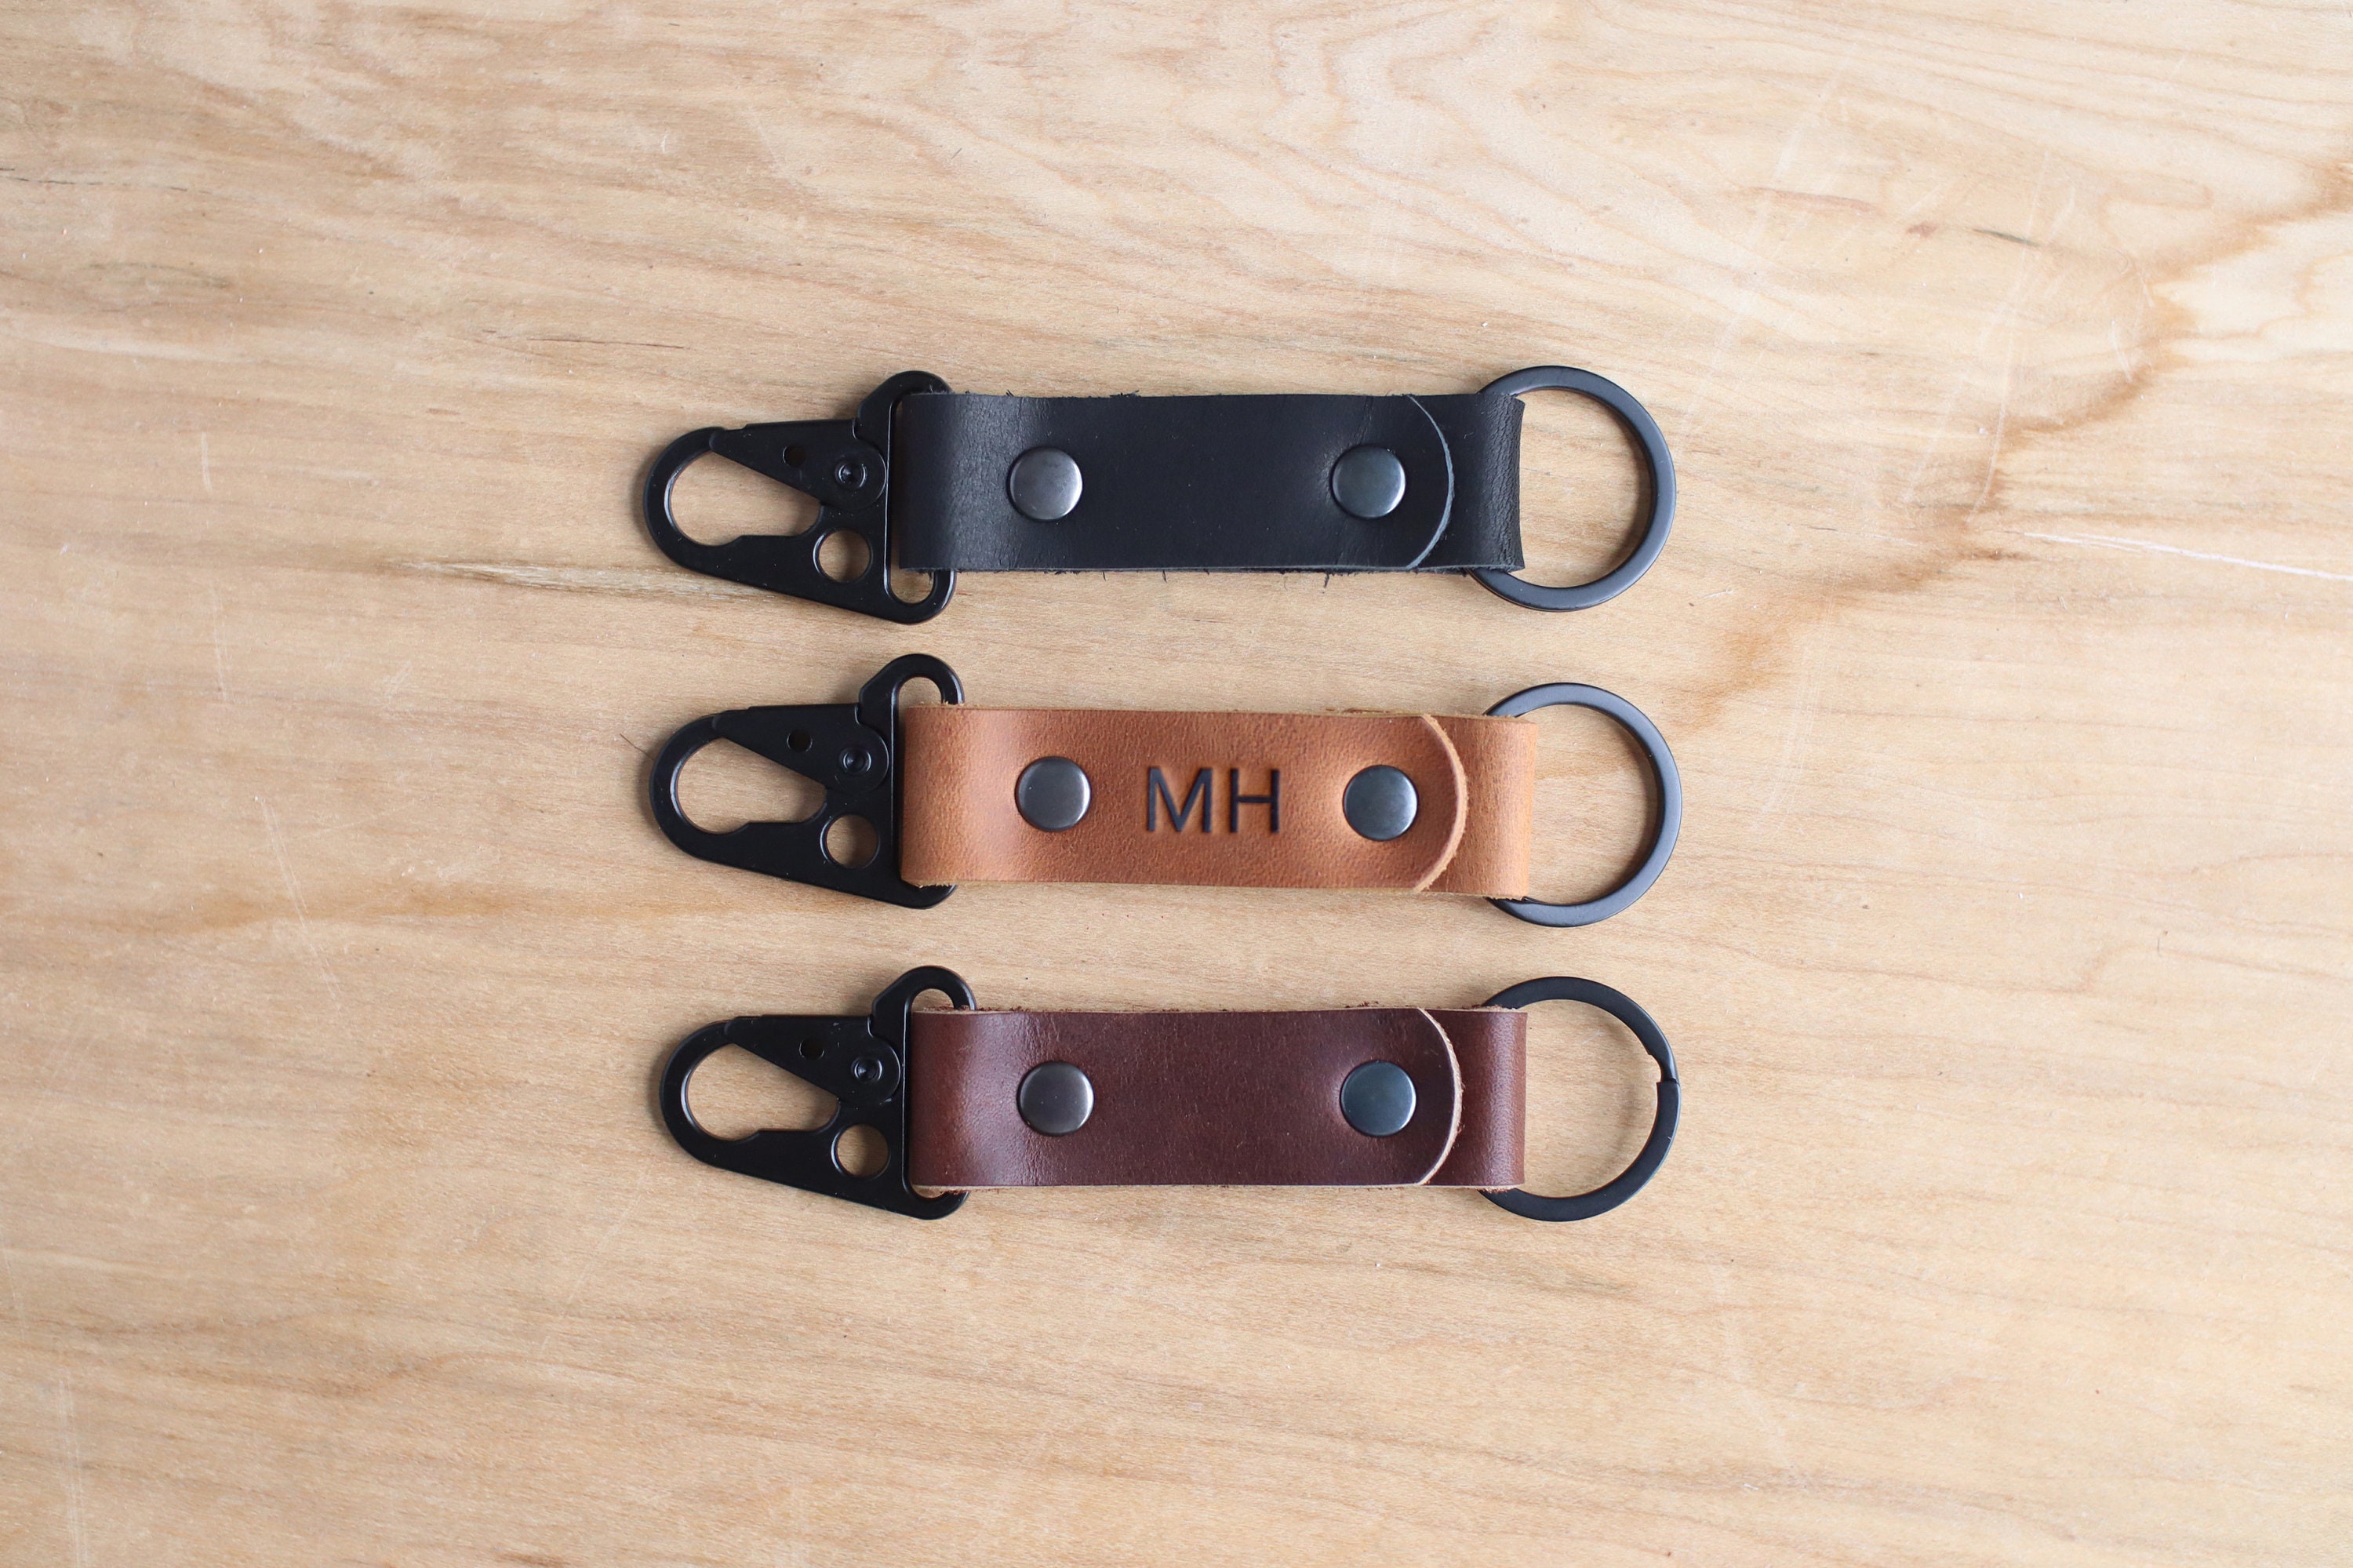 AMiGAZ Leather Loop and Trigger Snap Hook Keychain